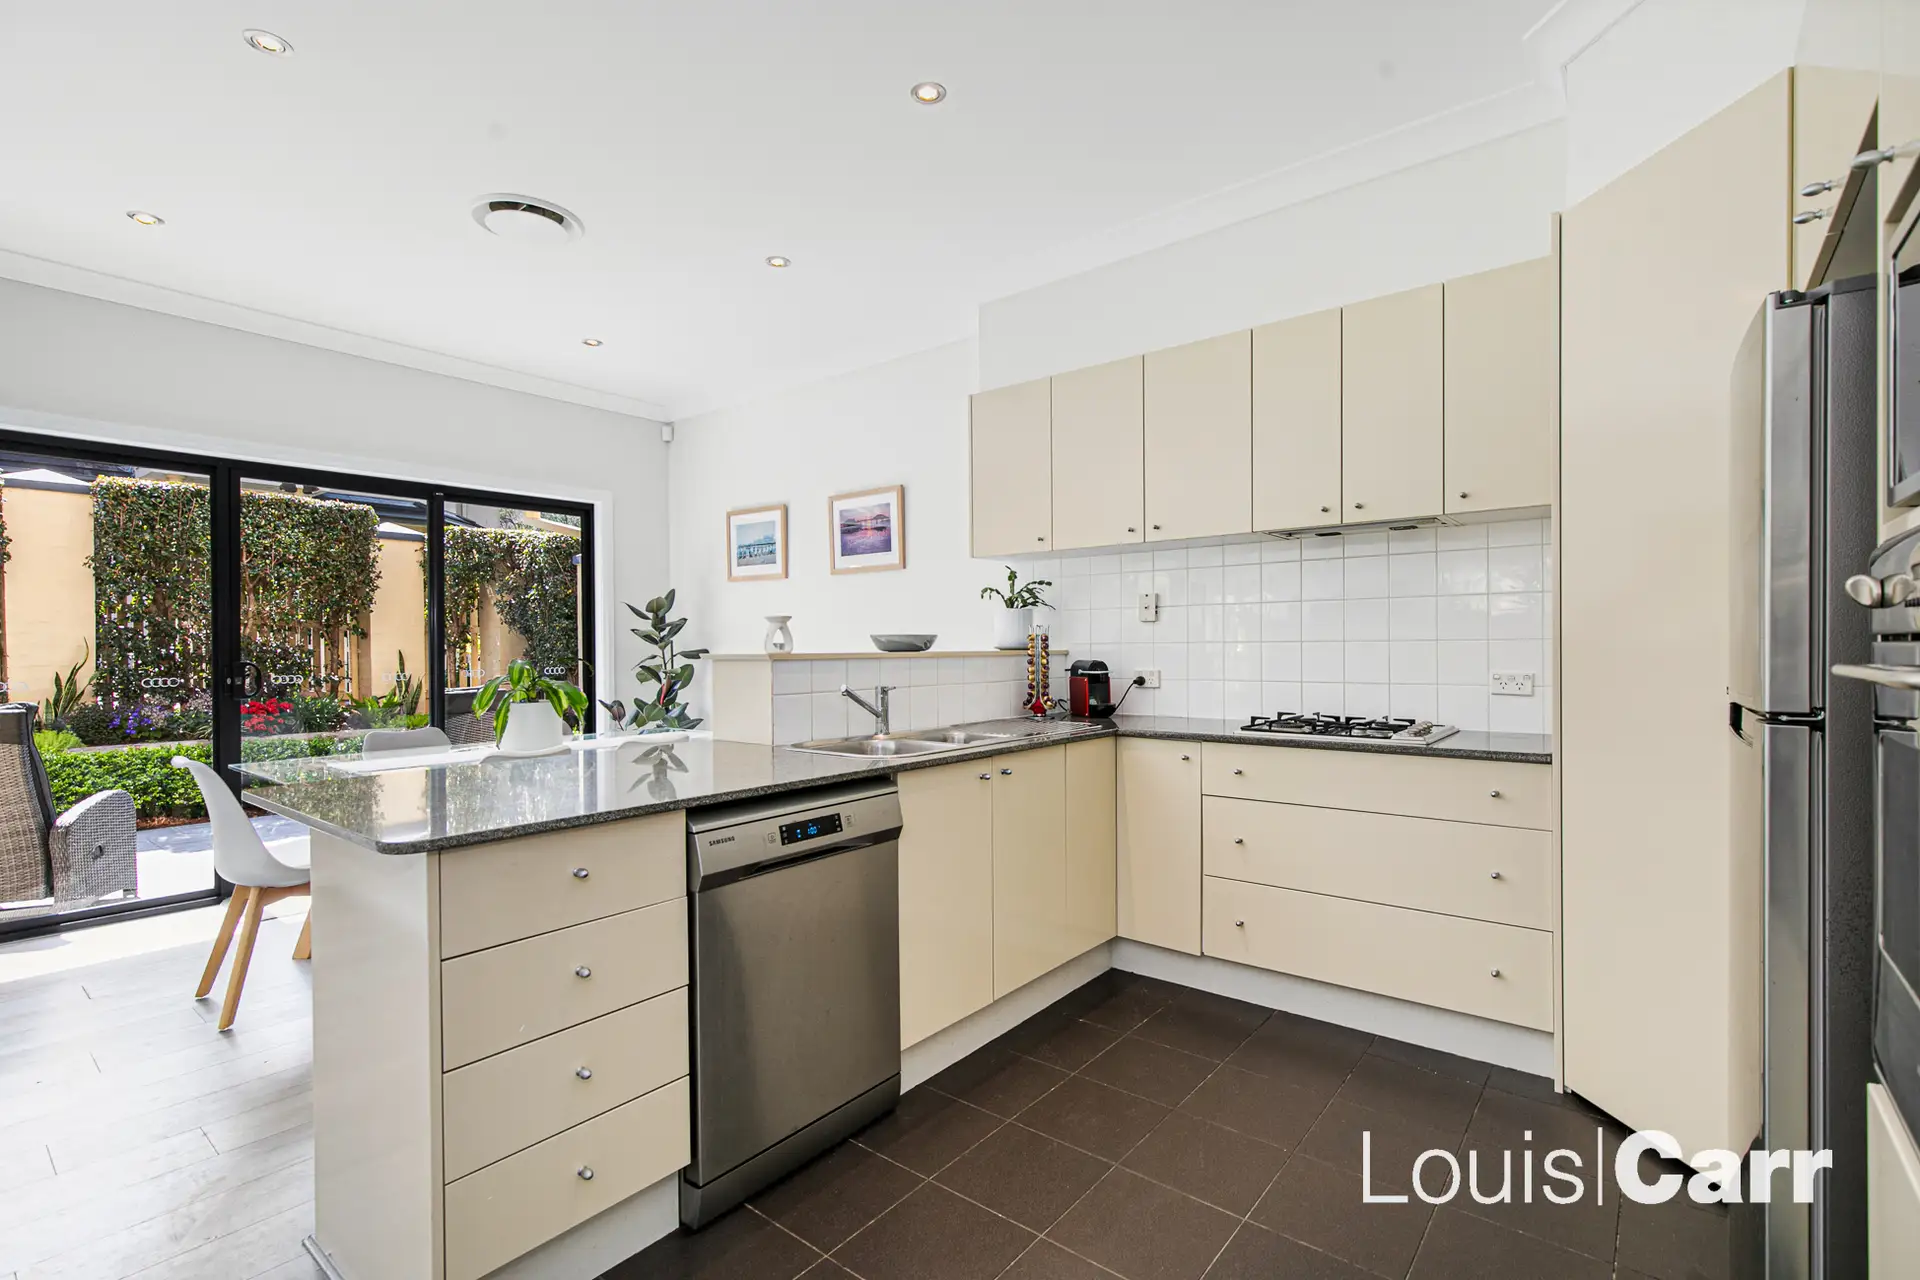 Photo #4: 9 Peartree Circuit, West Pennant Hills - Sold by Louis Carr Real Estate